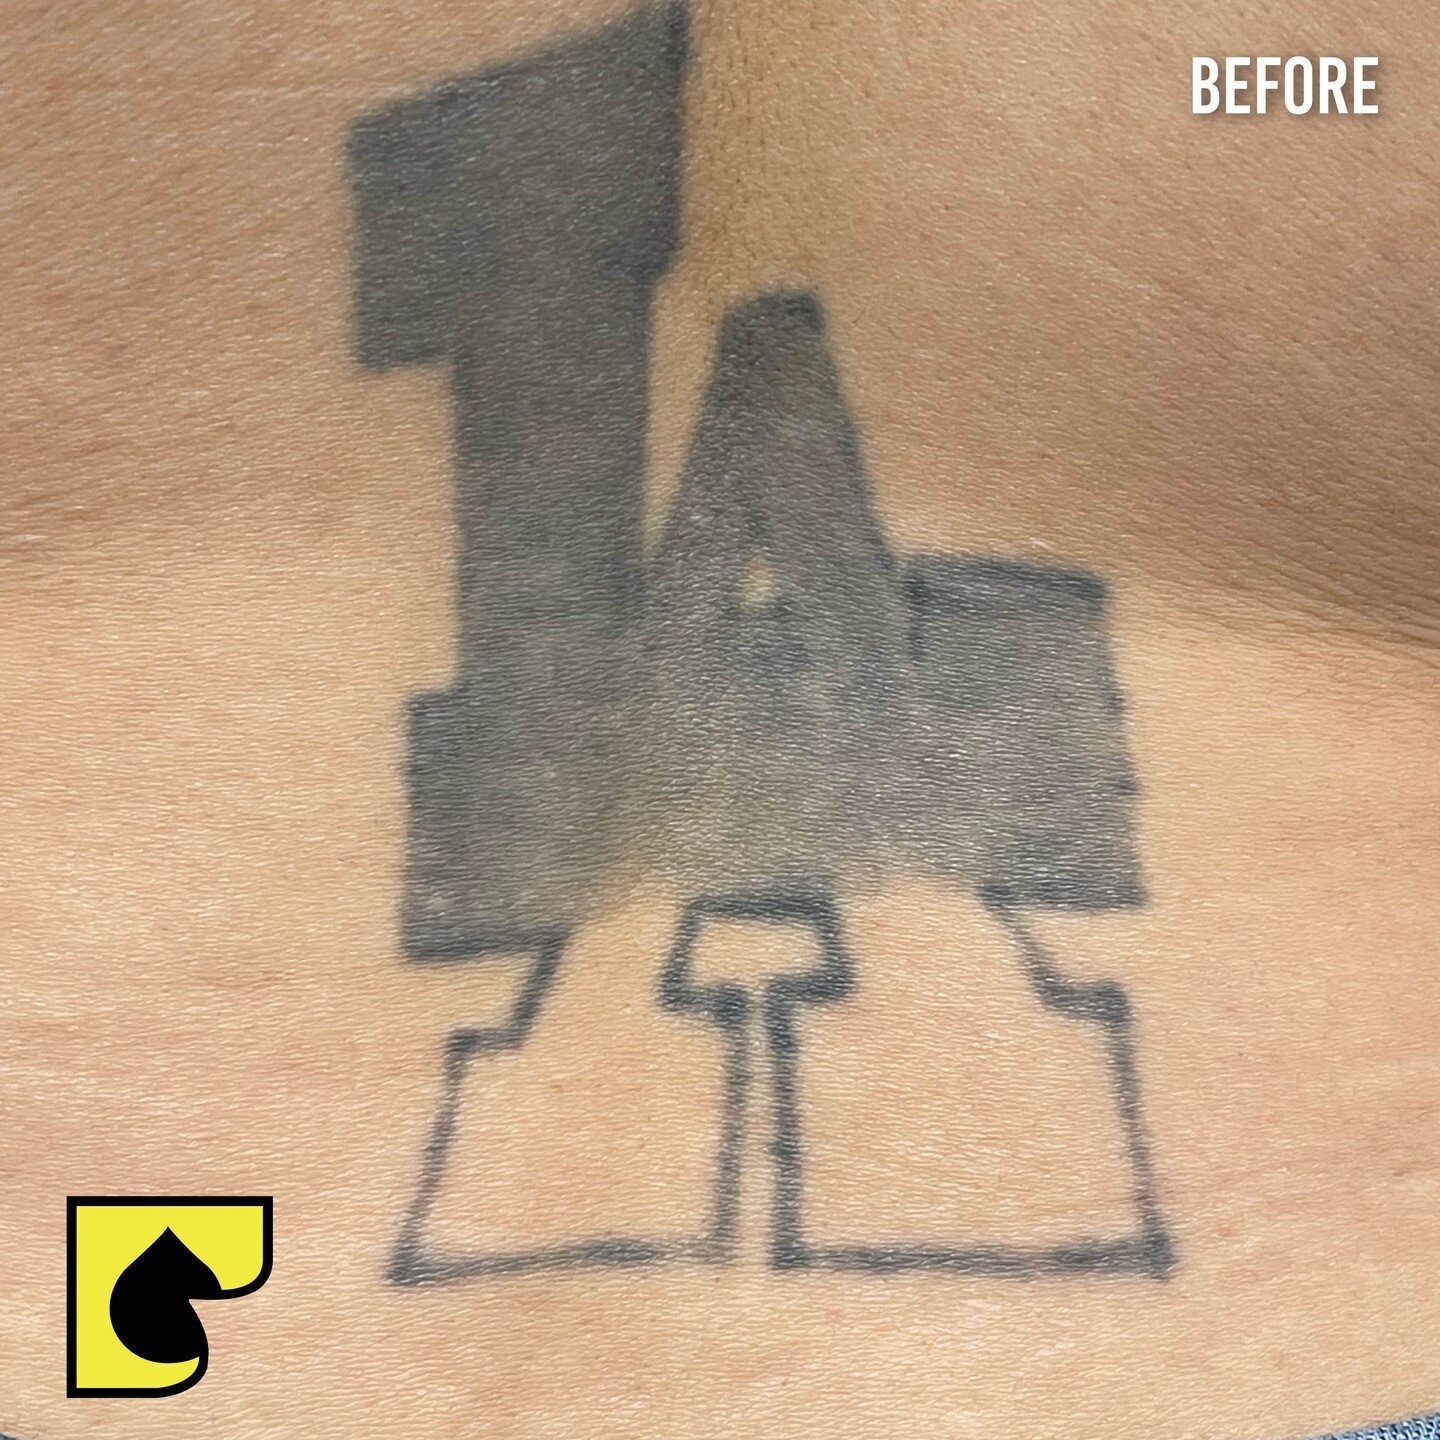 Tattoo Regrets? Remove your unwanted tattoos, big or small....
Call us today ☎️ (562) 861-9400 📞
*Treatment Results Vary Per Individual 

#unfilteredphotos #BeforeAndAfterTattooRemoval #BackLA #TattooRemovalIncSouthGate #BackTattooRemoval #SouthGate